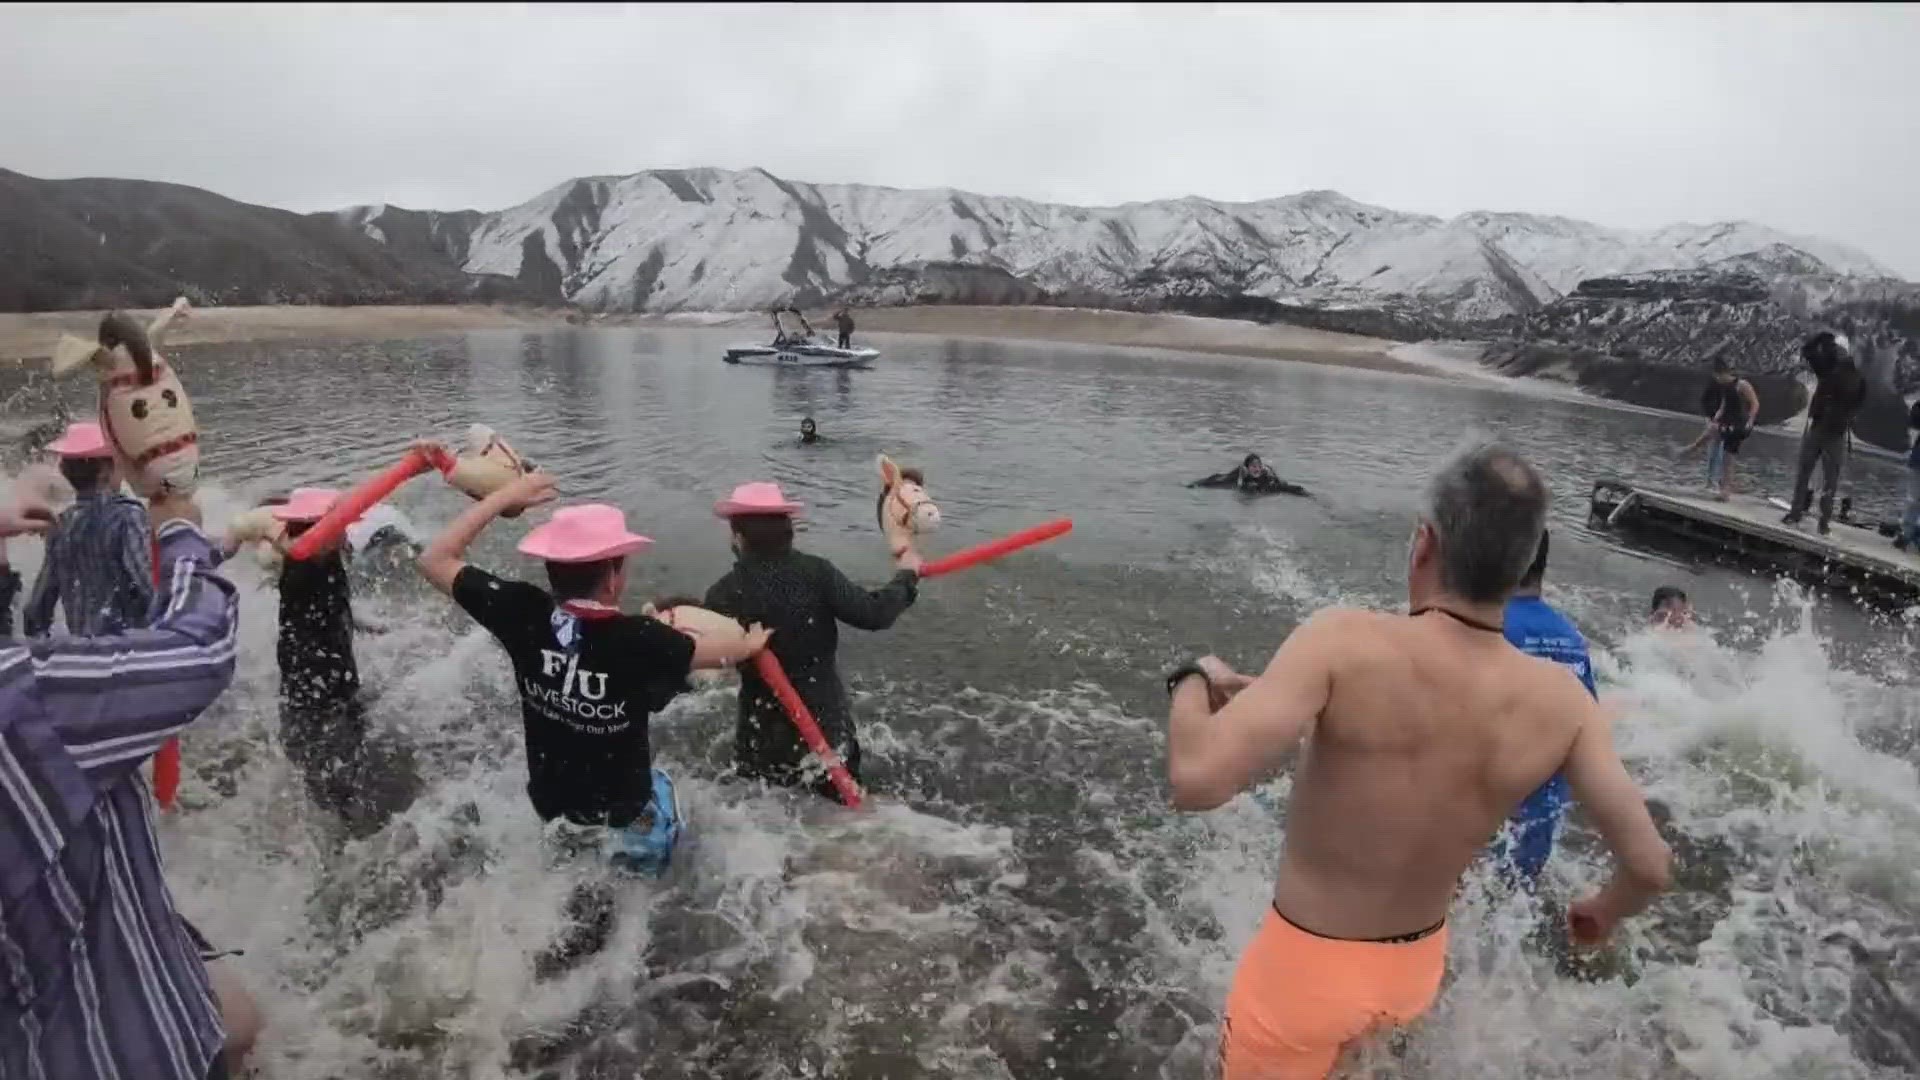 The event, at Lucky Peak Reservoir, saw over 400 people take an ice-cold dip for charity.